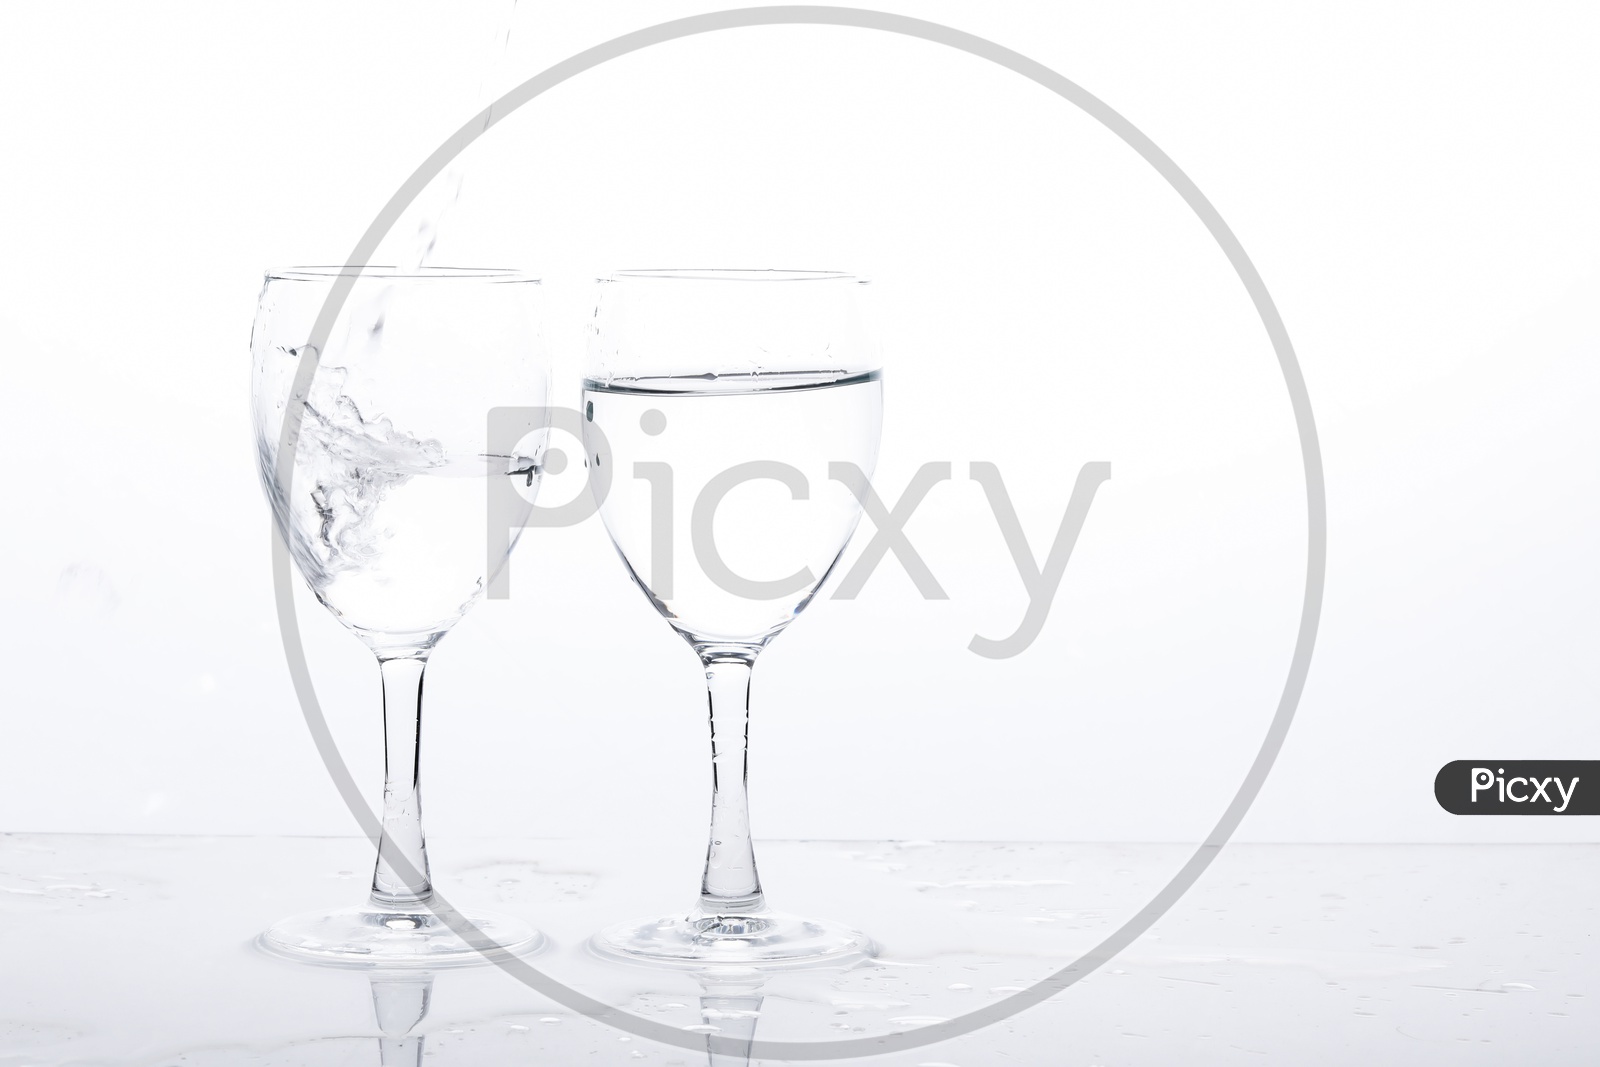 Empty Wine Glasses Filled With Water And Water Splash  On an Isolated White Background